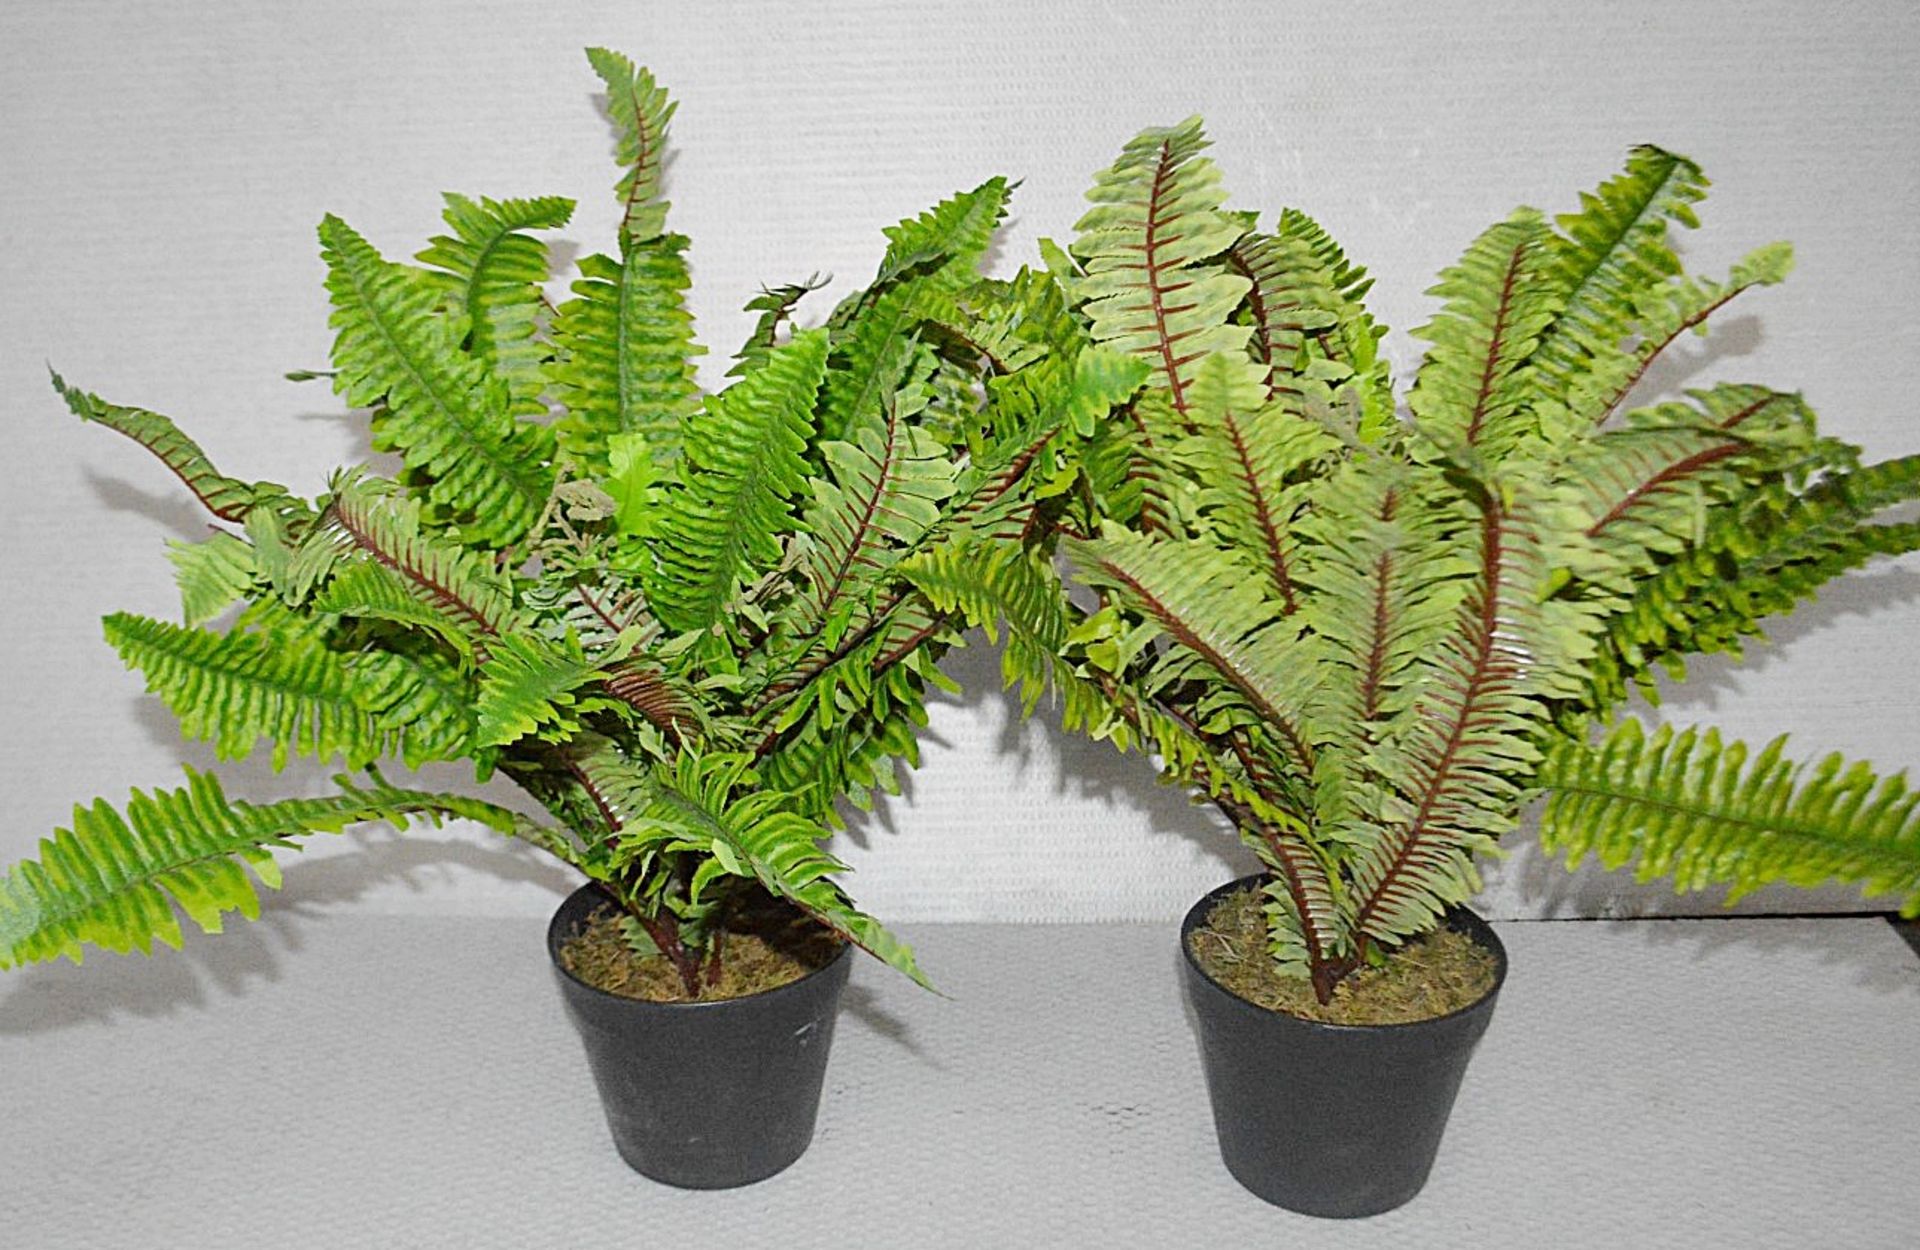 2 x Commercial Artificial Potted Ferns Plants - Ex-Display Showroom Pieces - Dimensions: Height 55cm